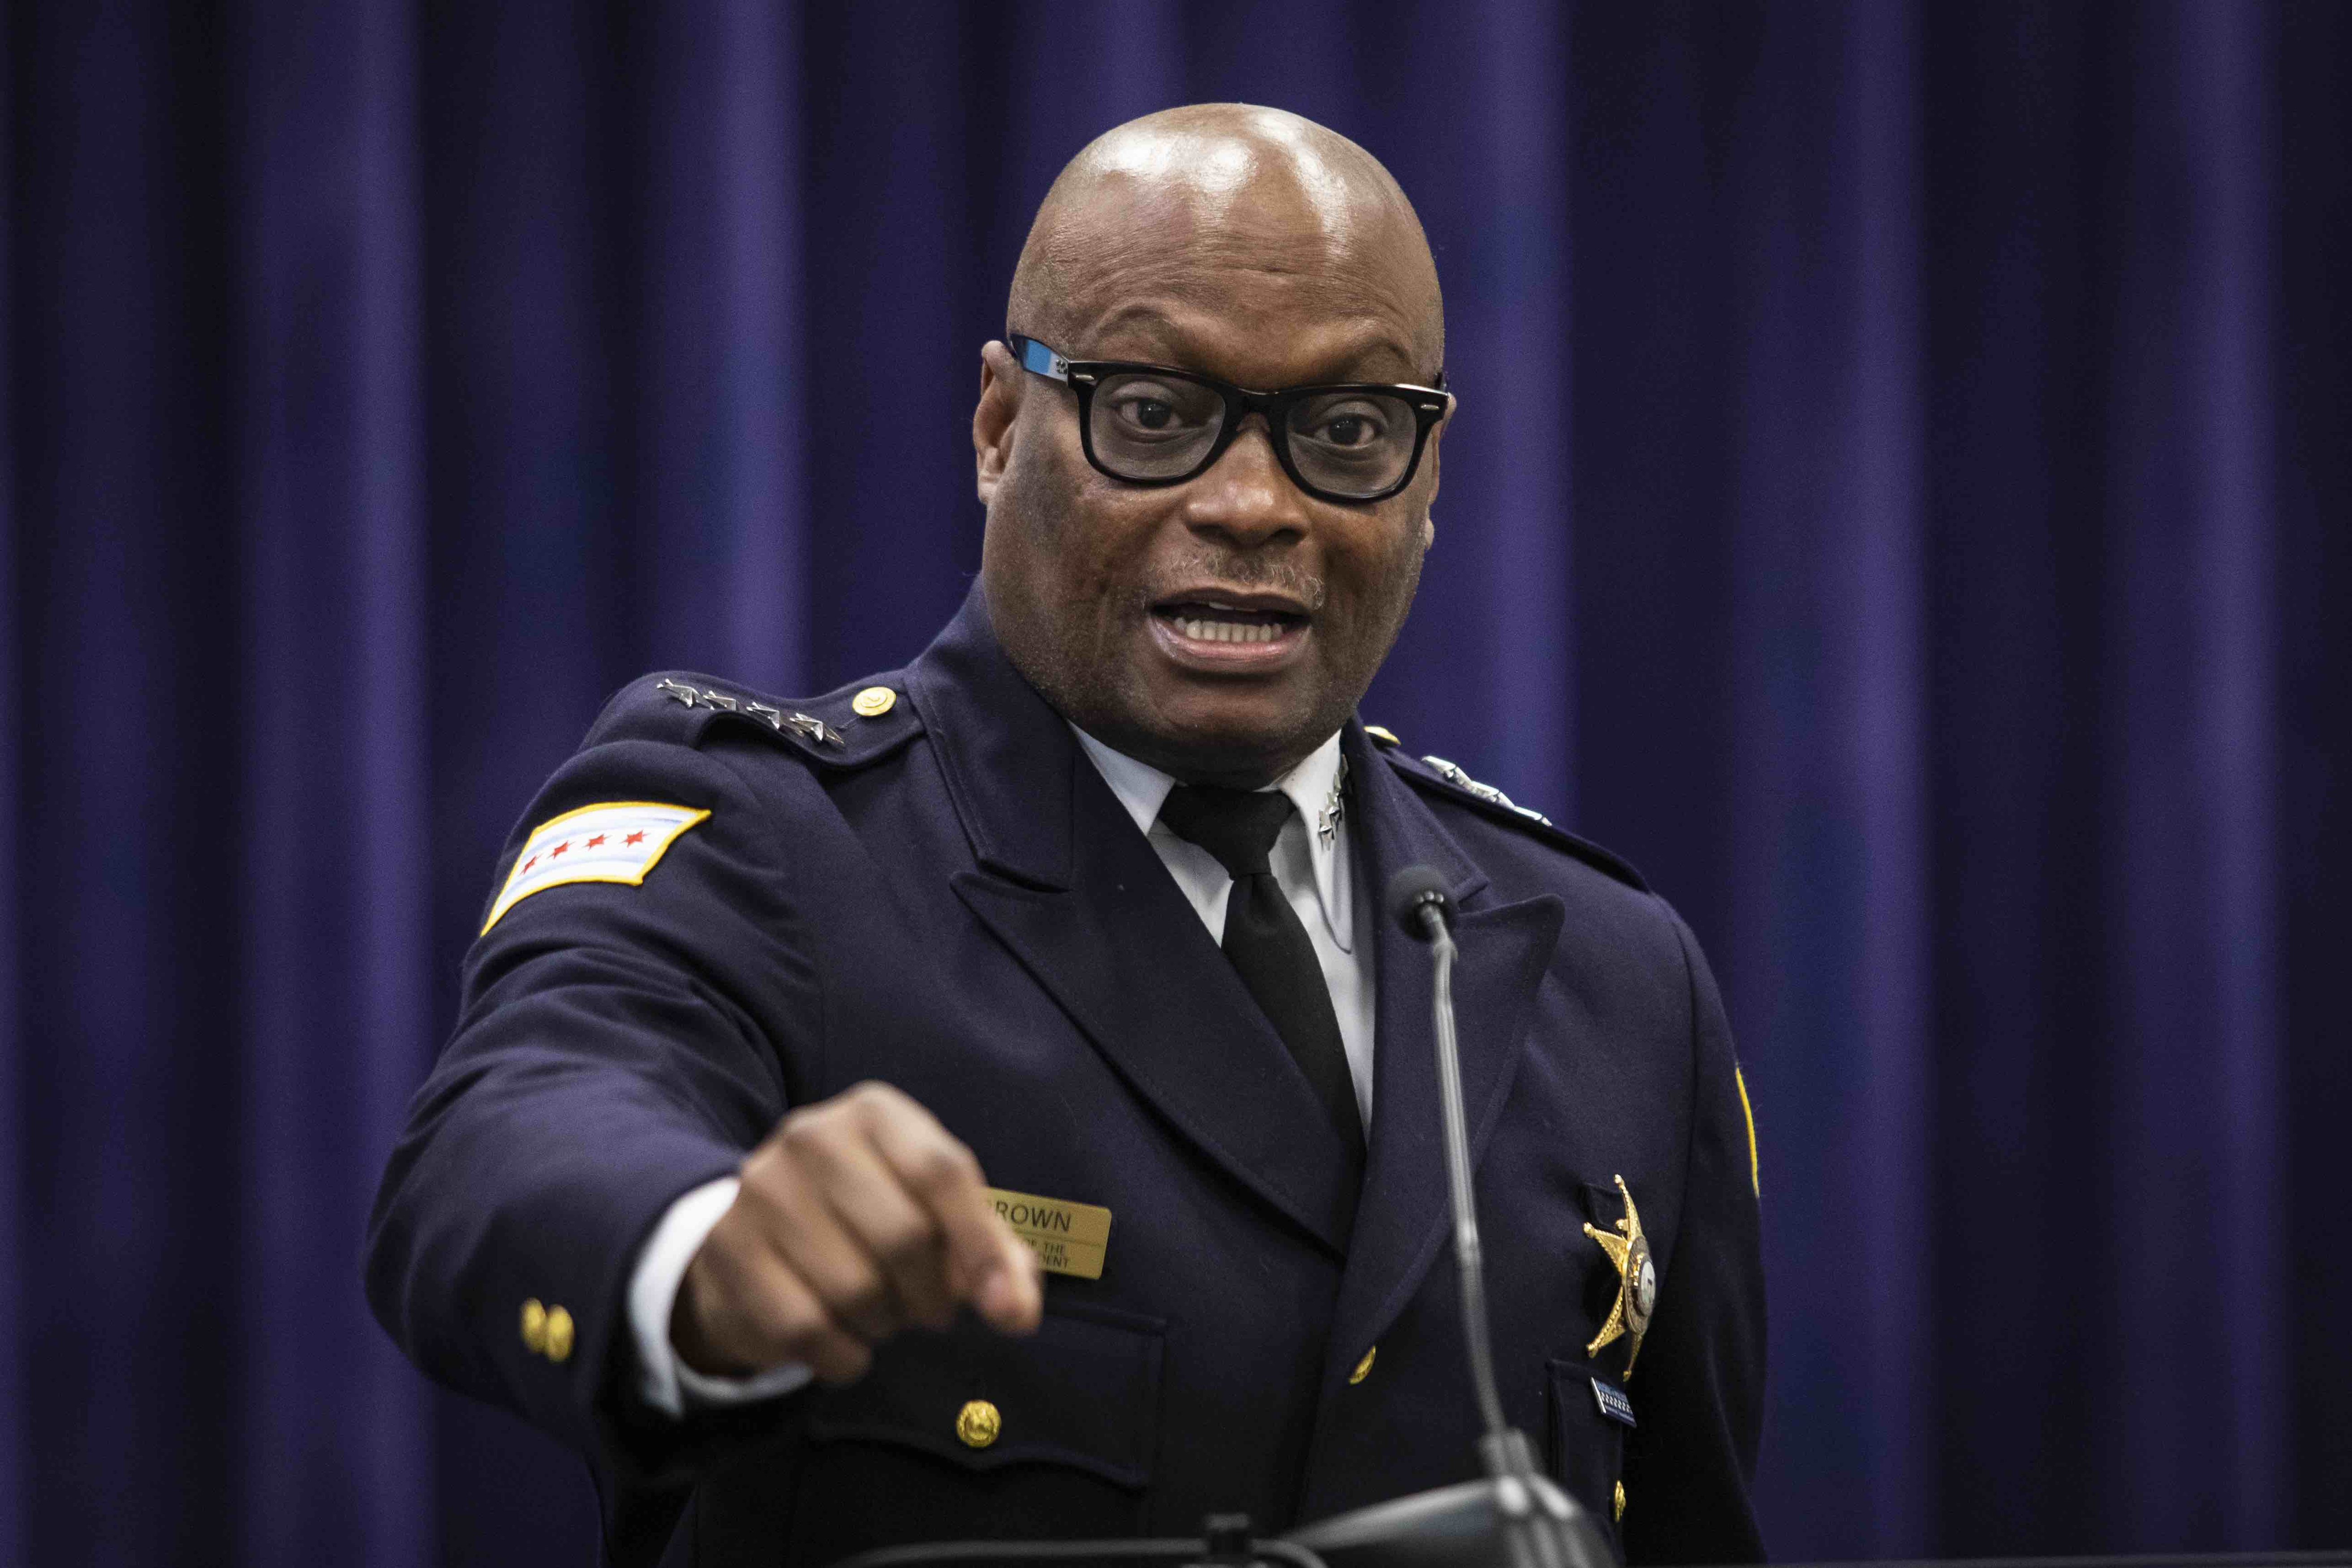 Chicago Police Supt. David Brown answers reporters’ questions during a news conference at CPD headquarters on the South Side, Thursday afternoon, April 22, 2021.